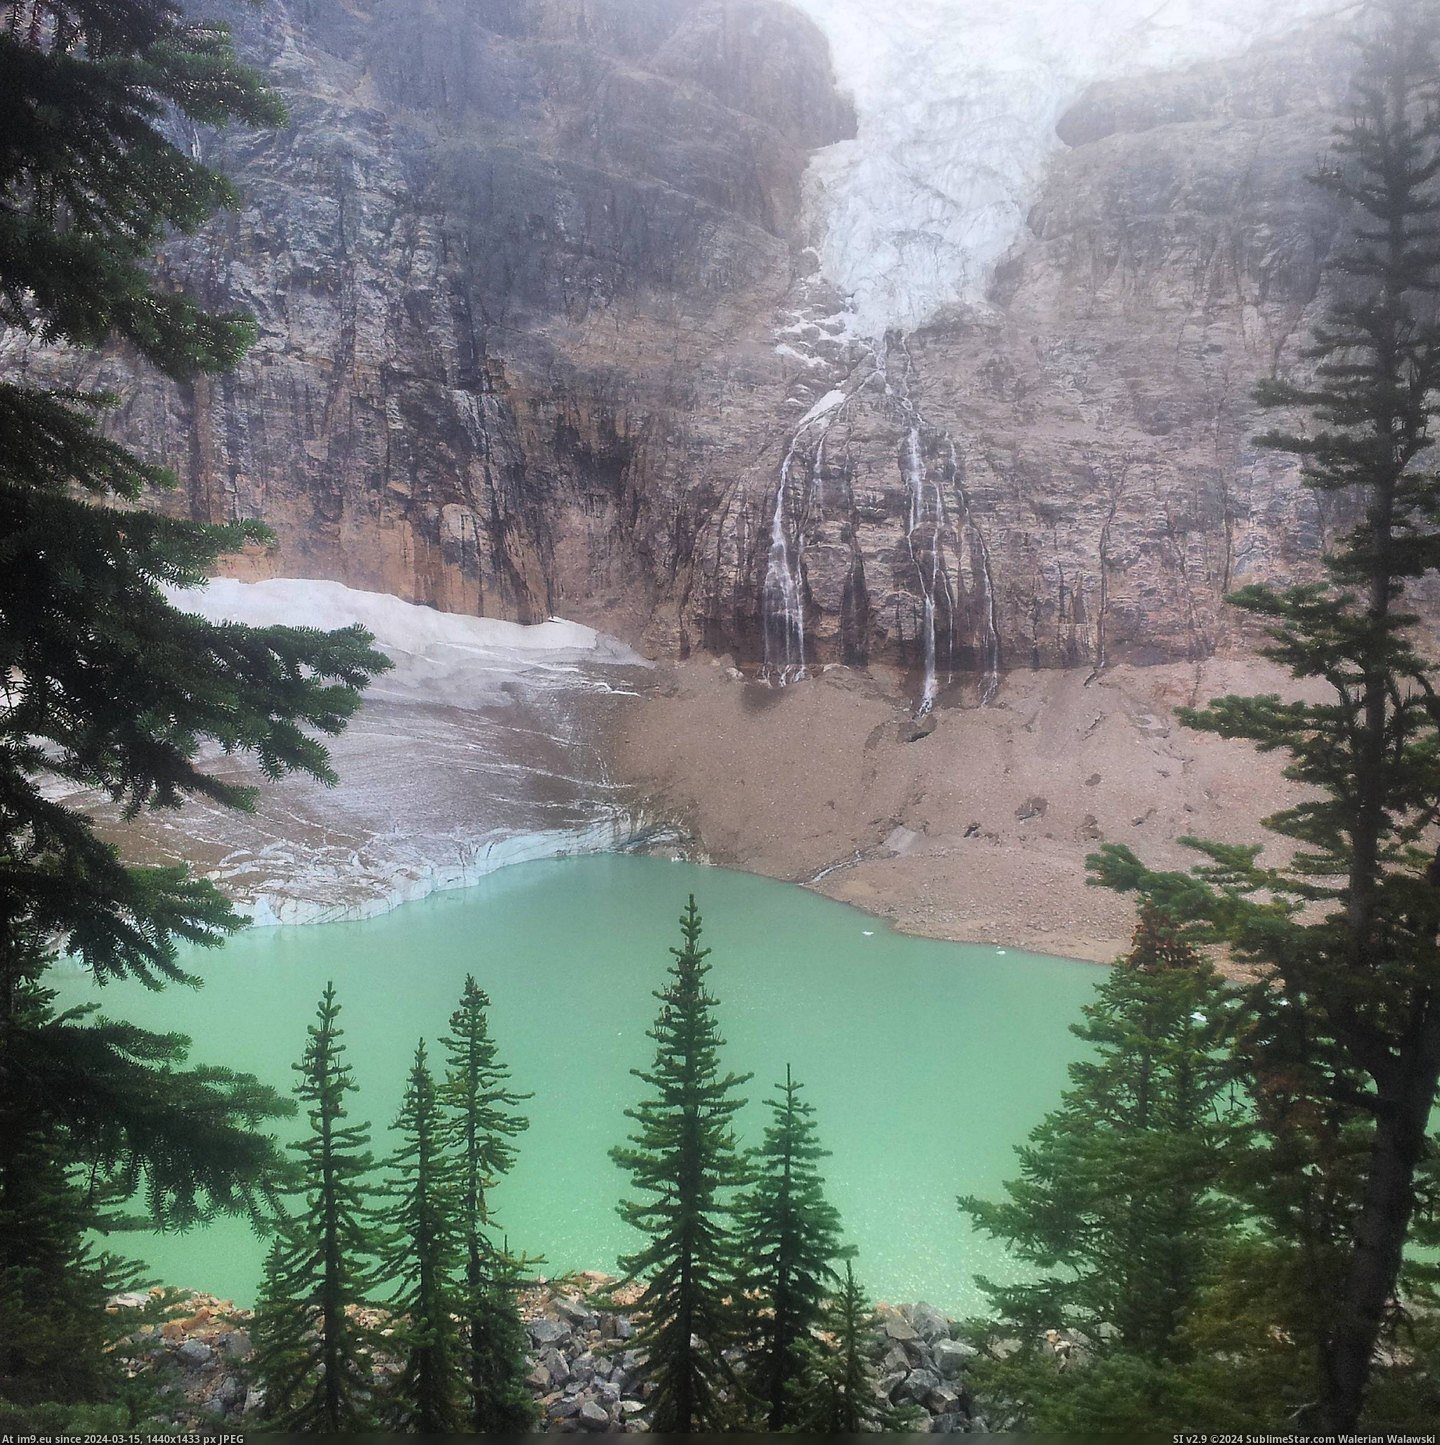 #Park #National #Angel #Quality #Highly #Crappy #Recommend #Seein #Glacier #Excuse #Jasper #2448x2448 [Earthporn] [2448x2448] Excuse the crappy quality. This is Angel Glacier in Jasper National Park, I would highly recommend seein Pic. (Bild von album My r/EARTHPORN favs))